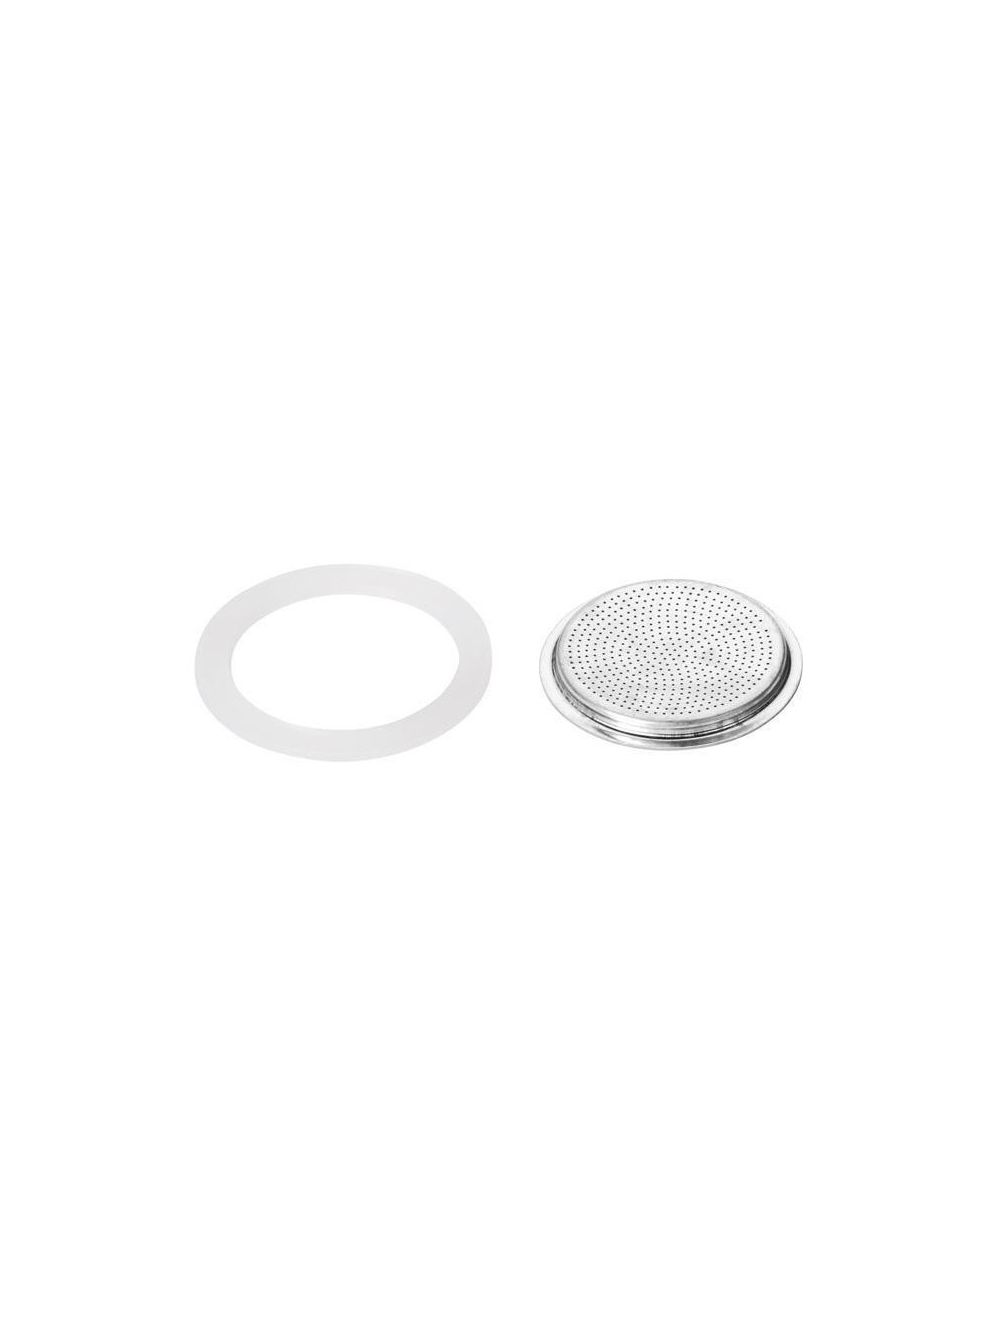 Silicon Seal and Filter 2cm 2Pc